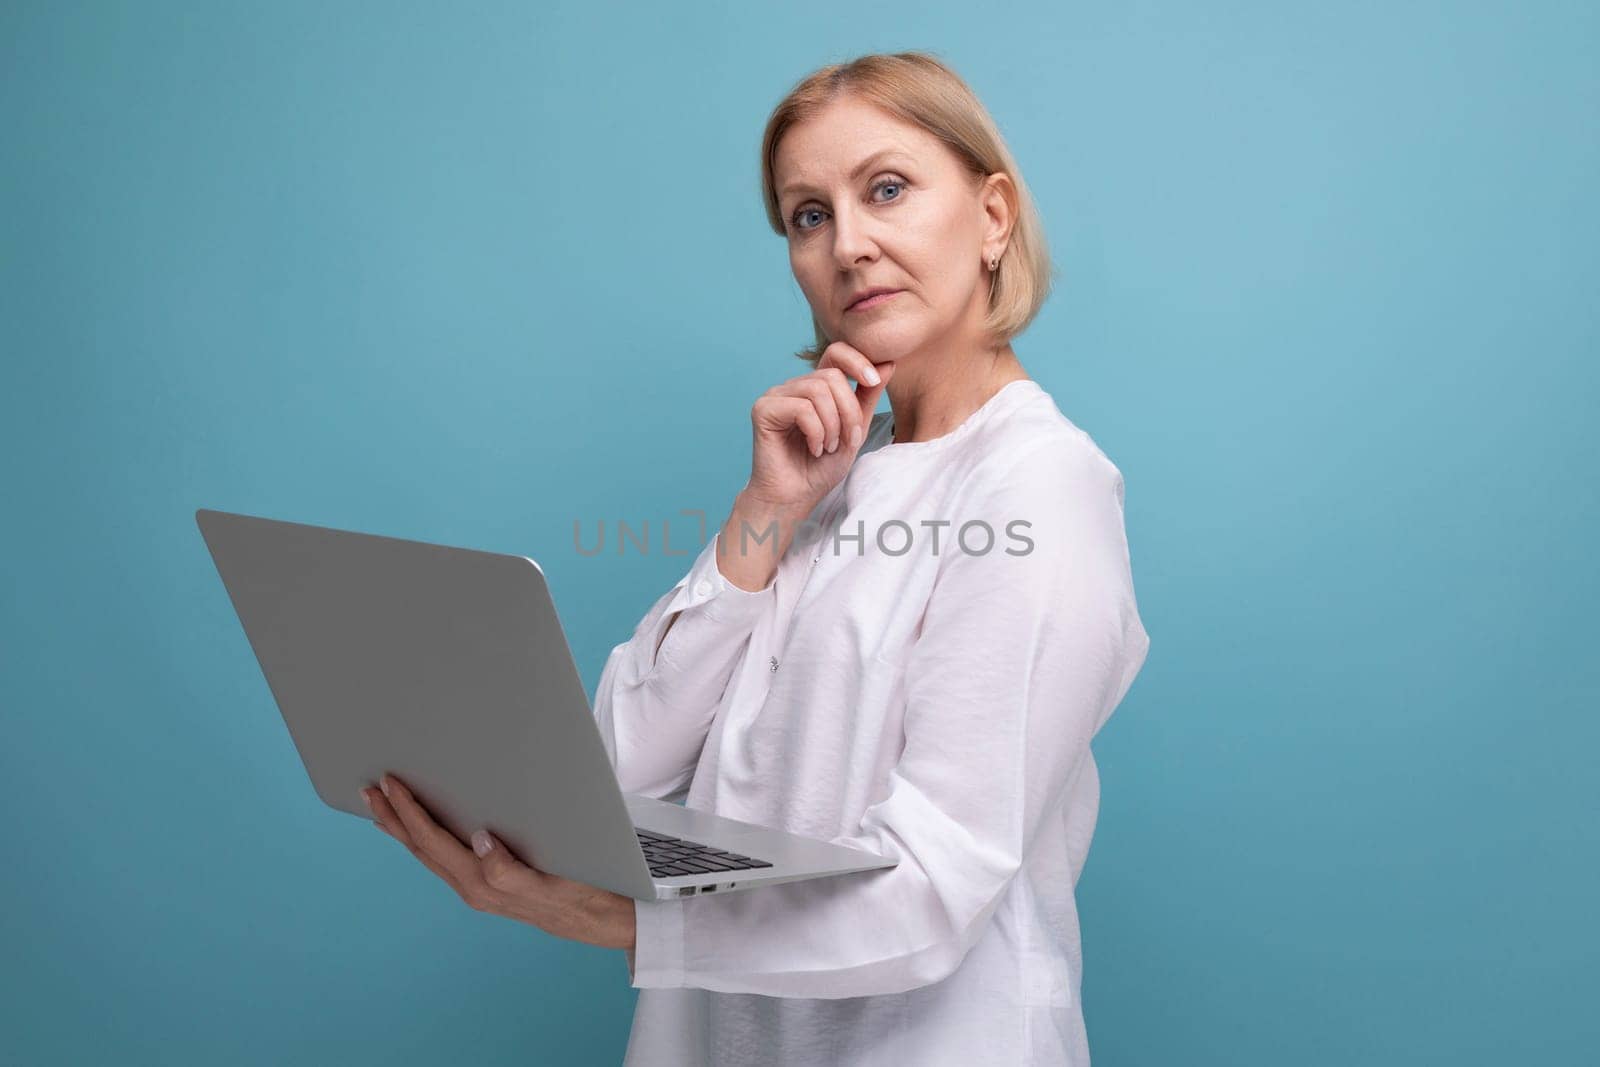 portrait of successful mature business woman with blond hair surfing the internet using laptop.